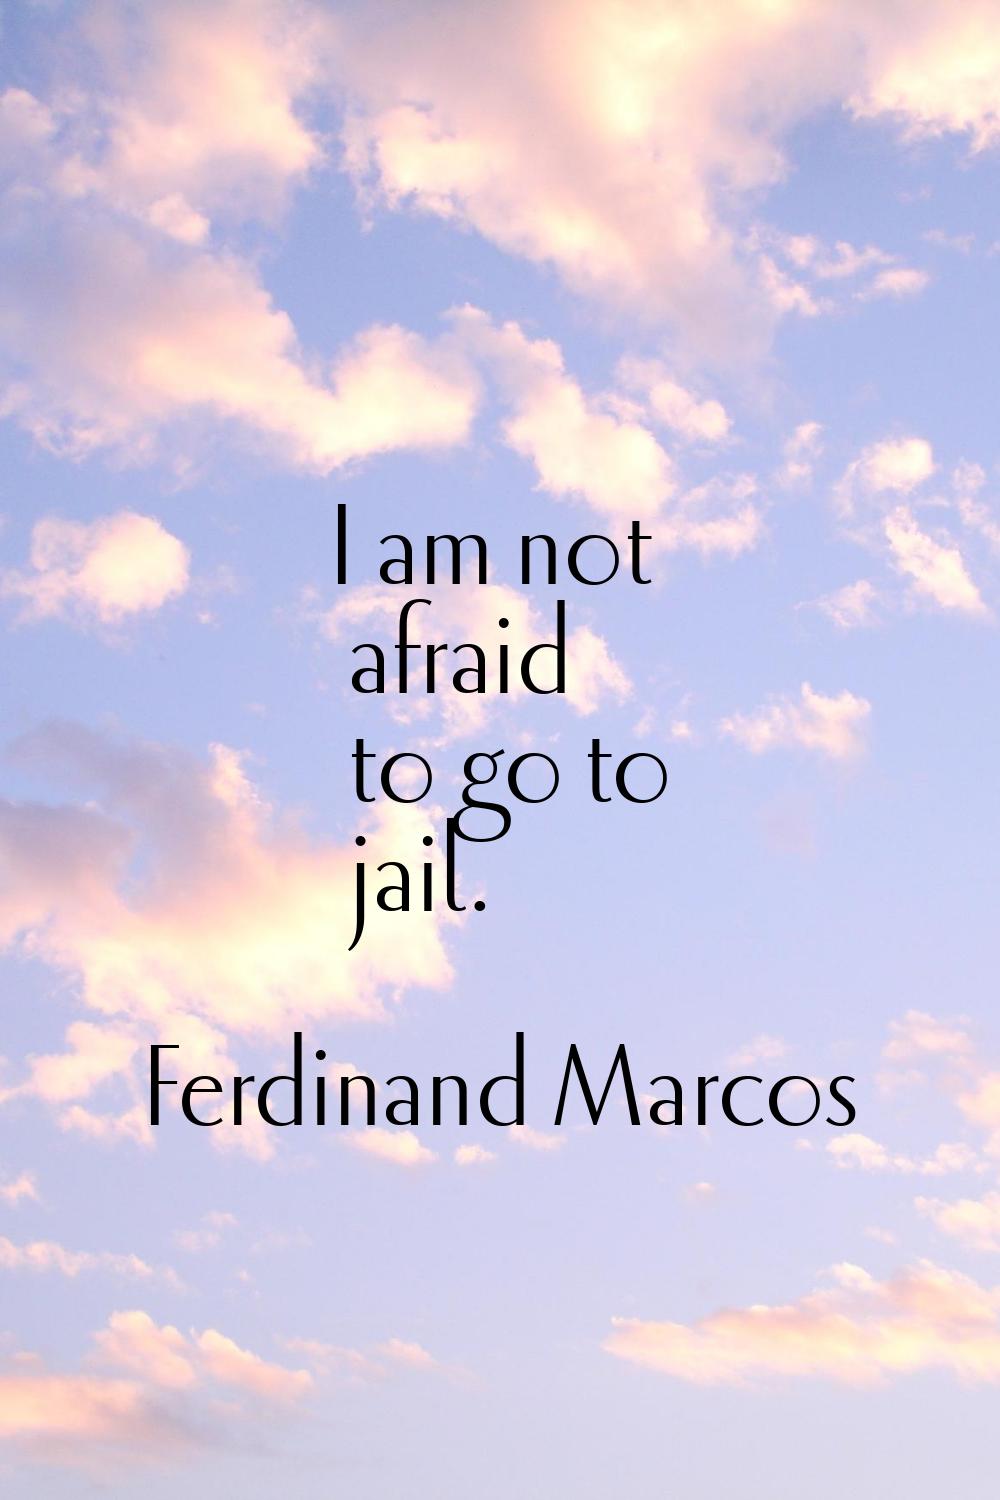 I am not afraid to go to jail.